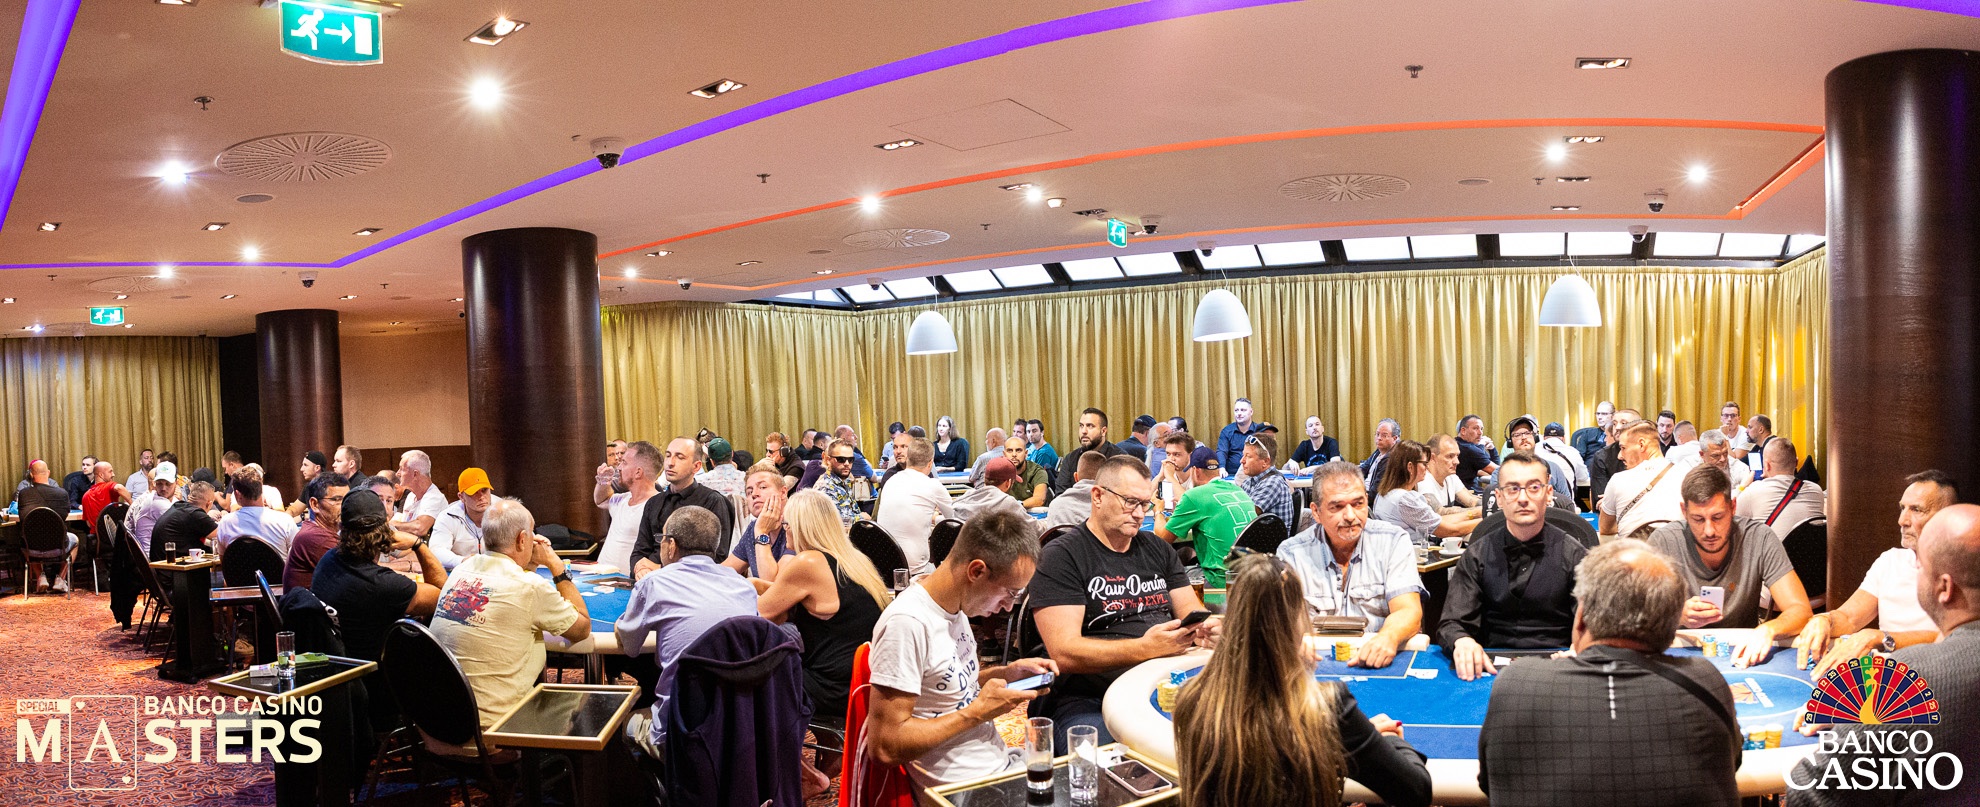 The record 30th of the Banco Casino Masters with 2011 entries and a 341,870€ prize pool is going to the finals!